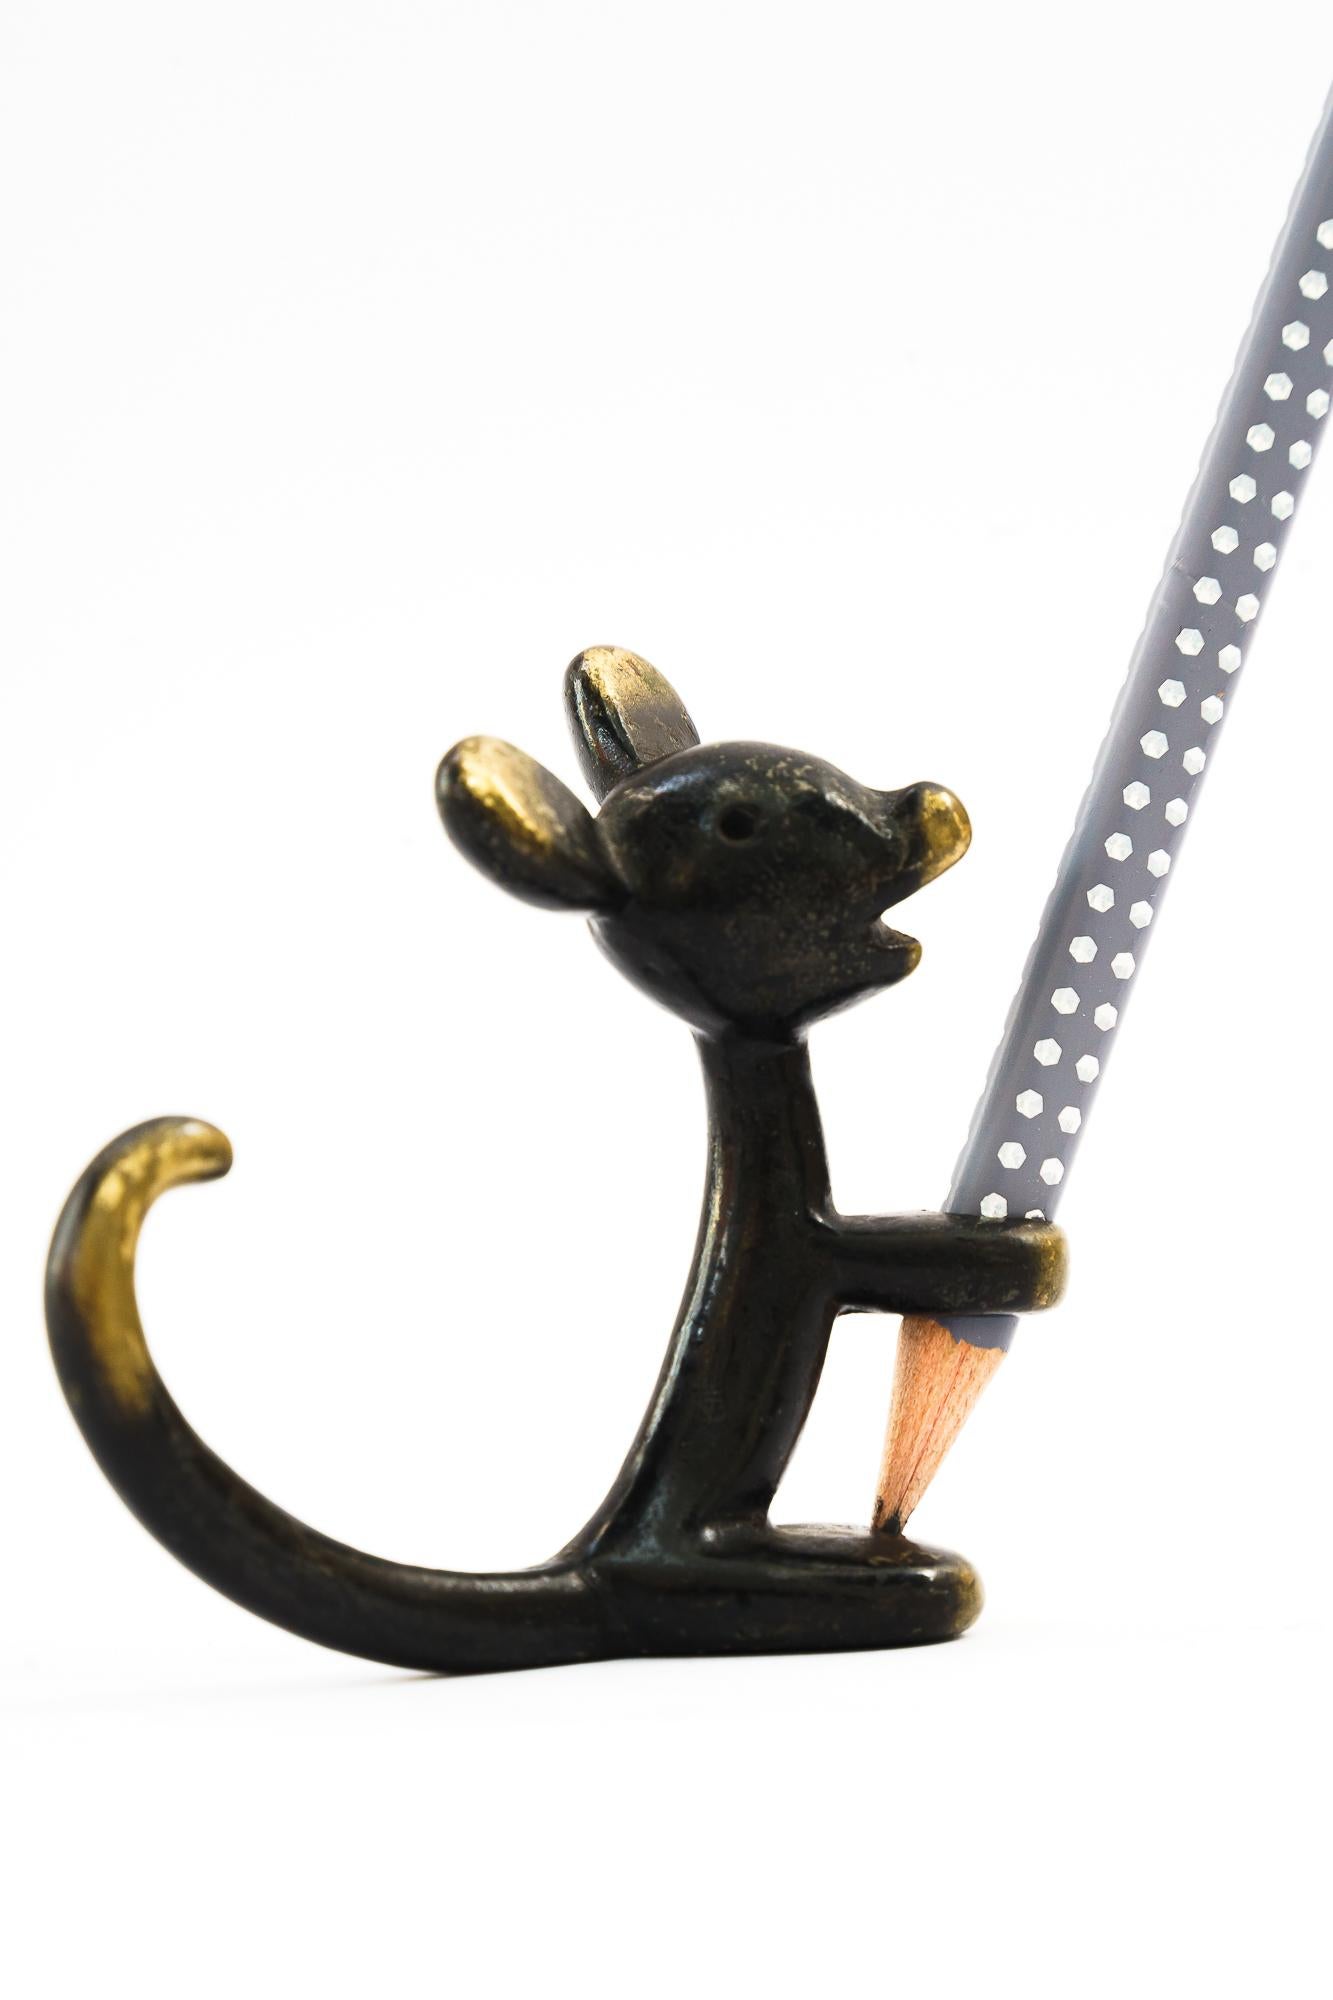 Blackened Pen holder by walter bosse shows a mouse around 1950s For Sale